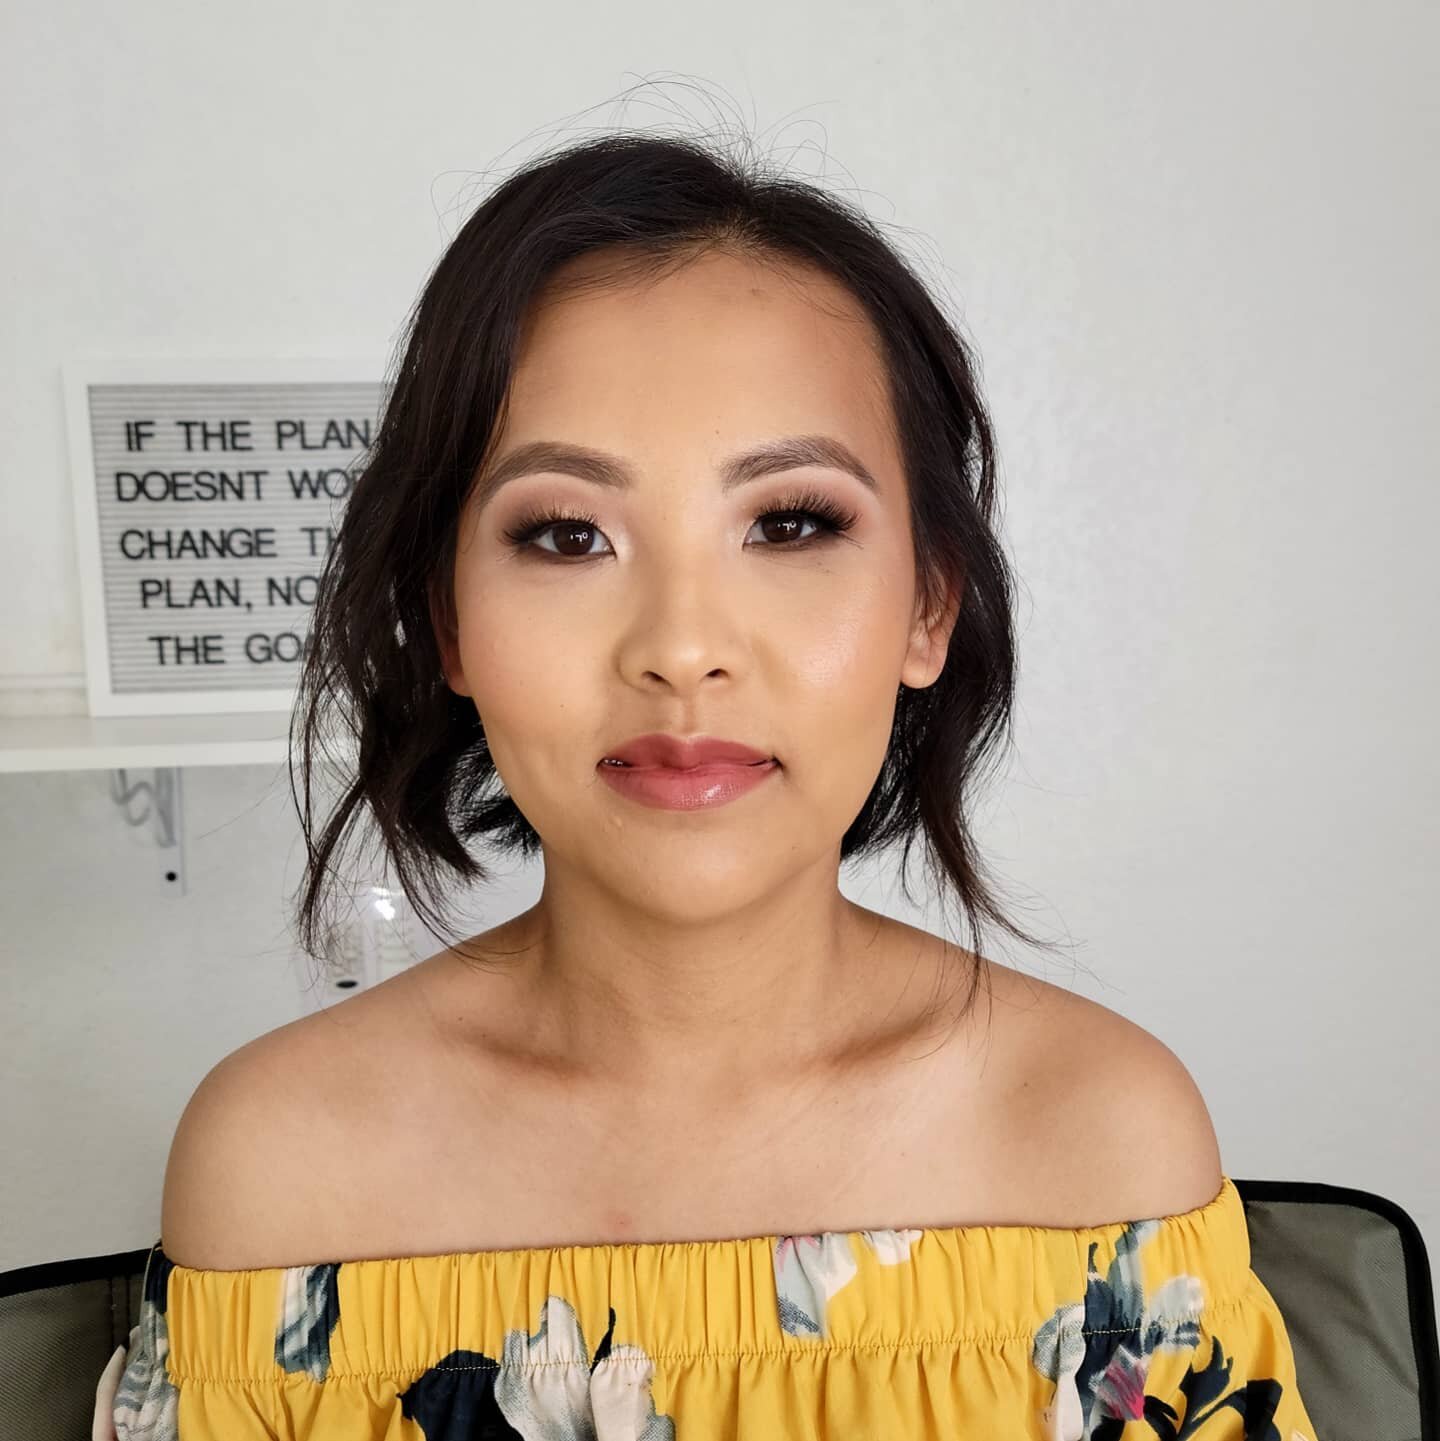 Family photos today! For my monolid clients I always love to go darker and fuller on lashes to really open up their eyes! What's your advice?
.
.
.
.
-------
#mua #undiscovered_muas #wakeupandmakeup #wakeuptocakeup143 #makeupartist #makeupfanatic1 #f